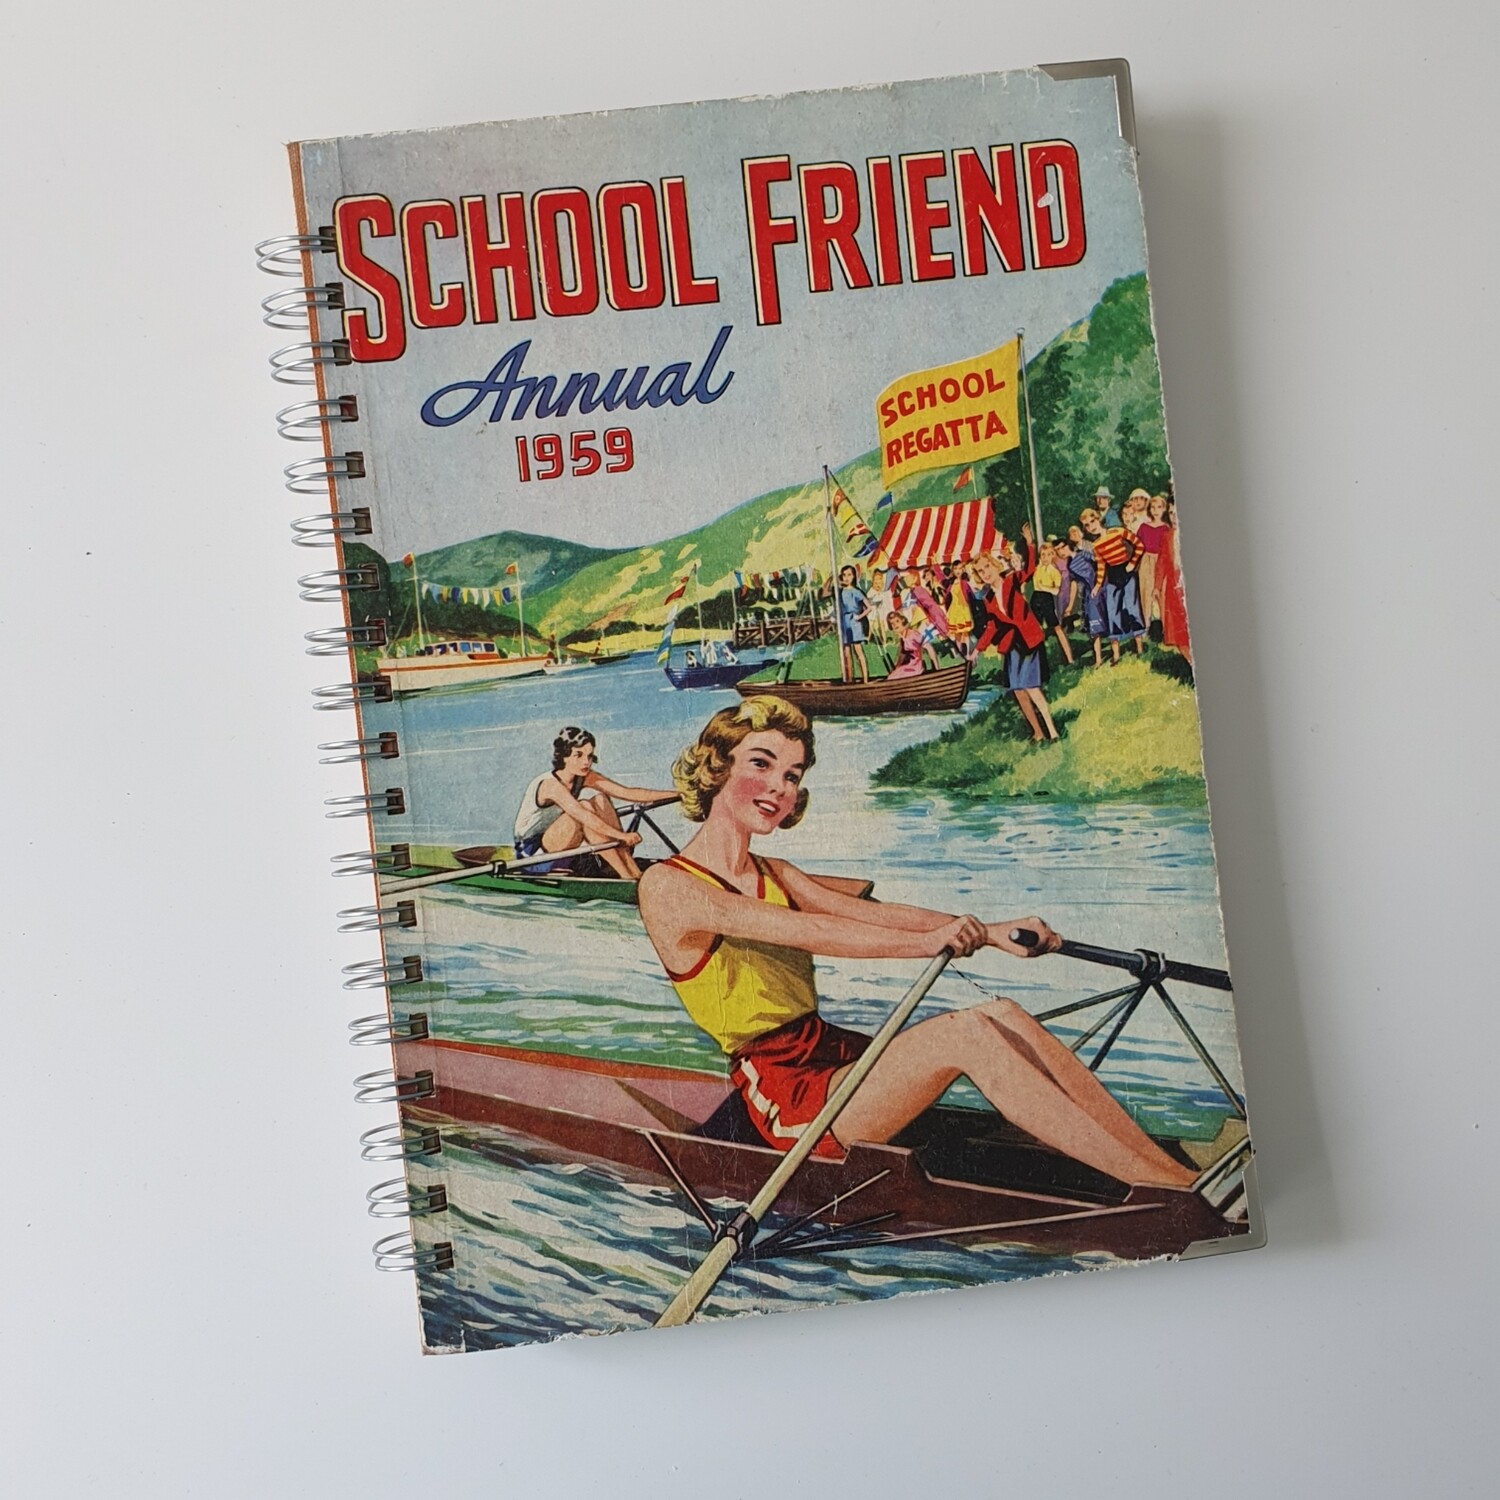 School Friend Annual 1959, rowing, Oxford, Cambridge plain paper notebook, comes with metal book corners